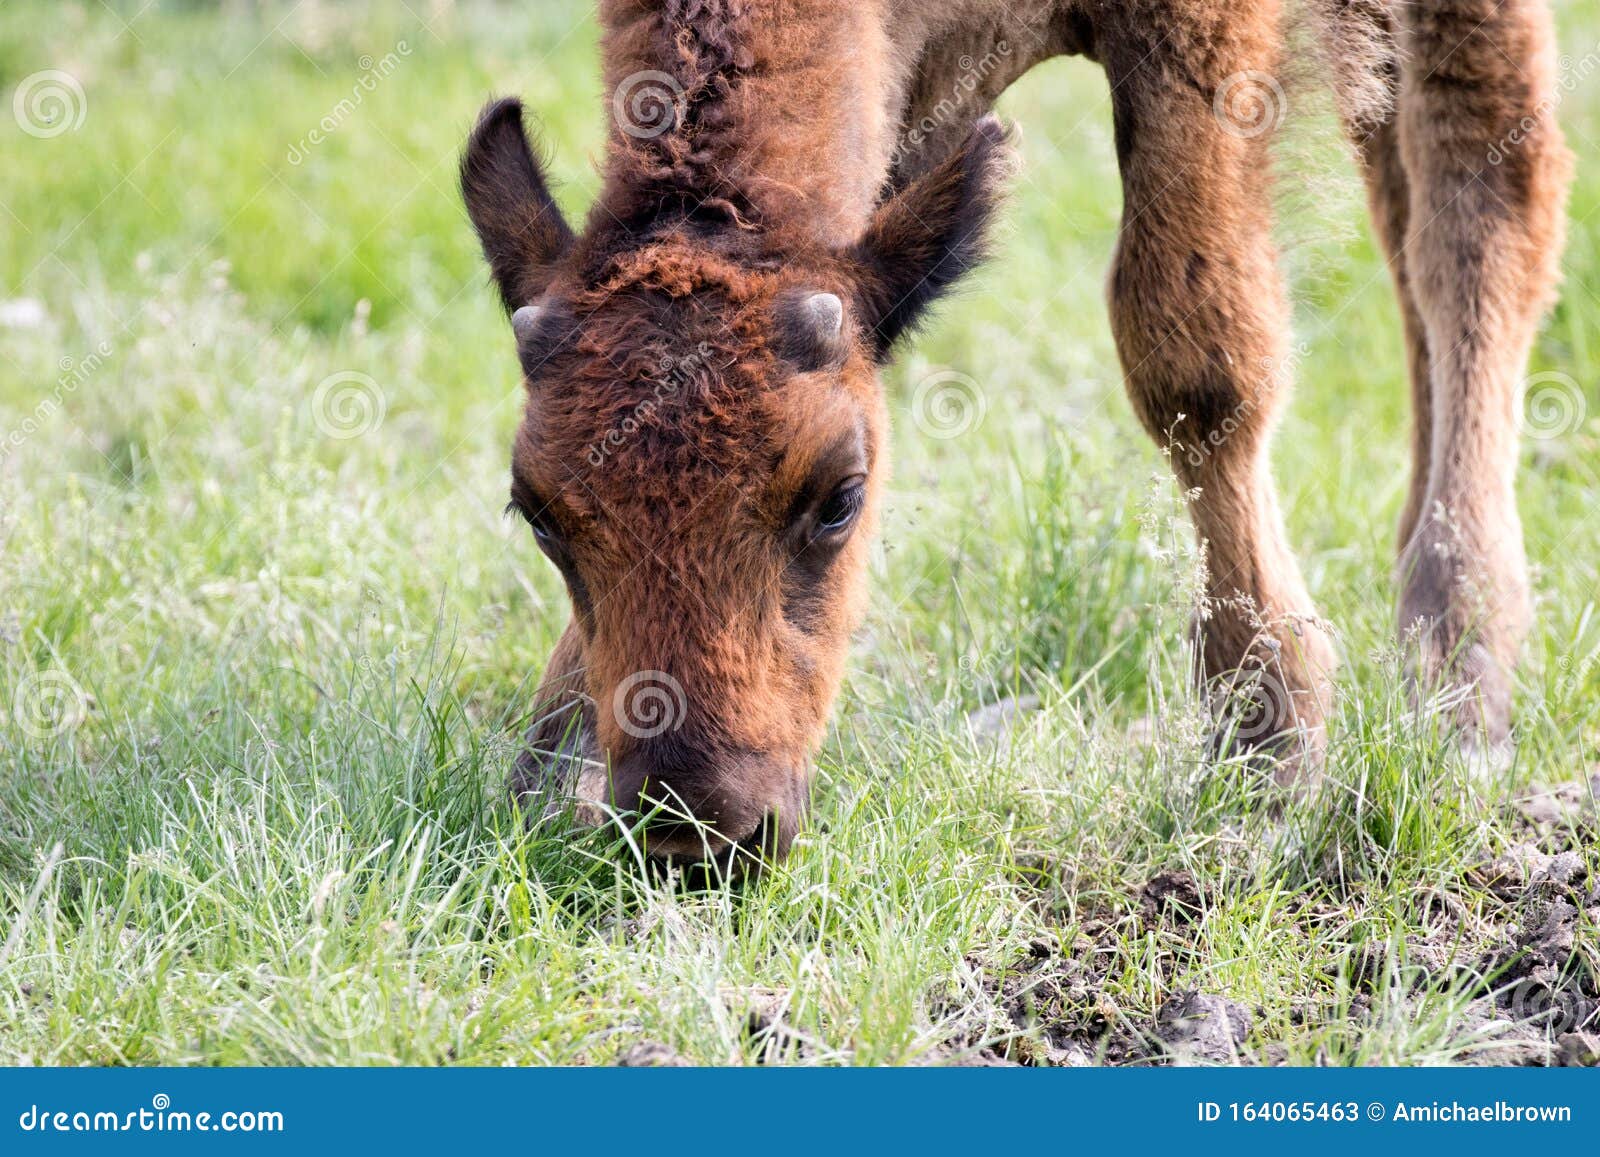 Young Bison Calf stock image. Image of mammal, landscape - 164065463